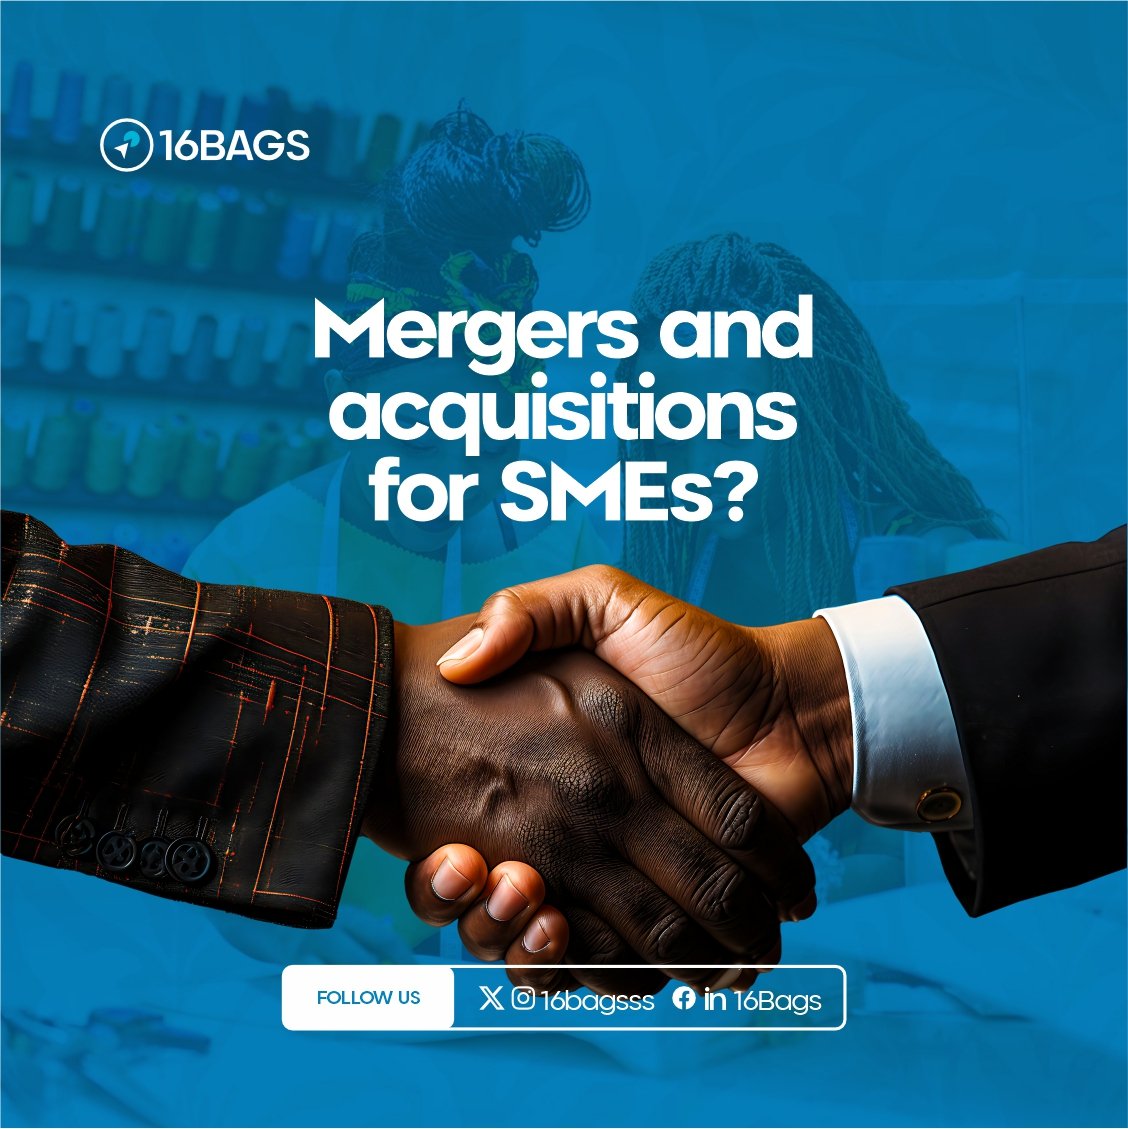 Mergers and acquisitions is typically known for big corporates. 

16Bags is making it an option for mid-sized businesses across Africa. 

Get familiar with our website - 16Bags.com

#16bags #BuyABusiness #SellYourBusiness